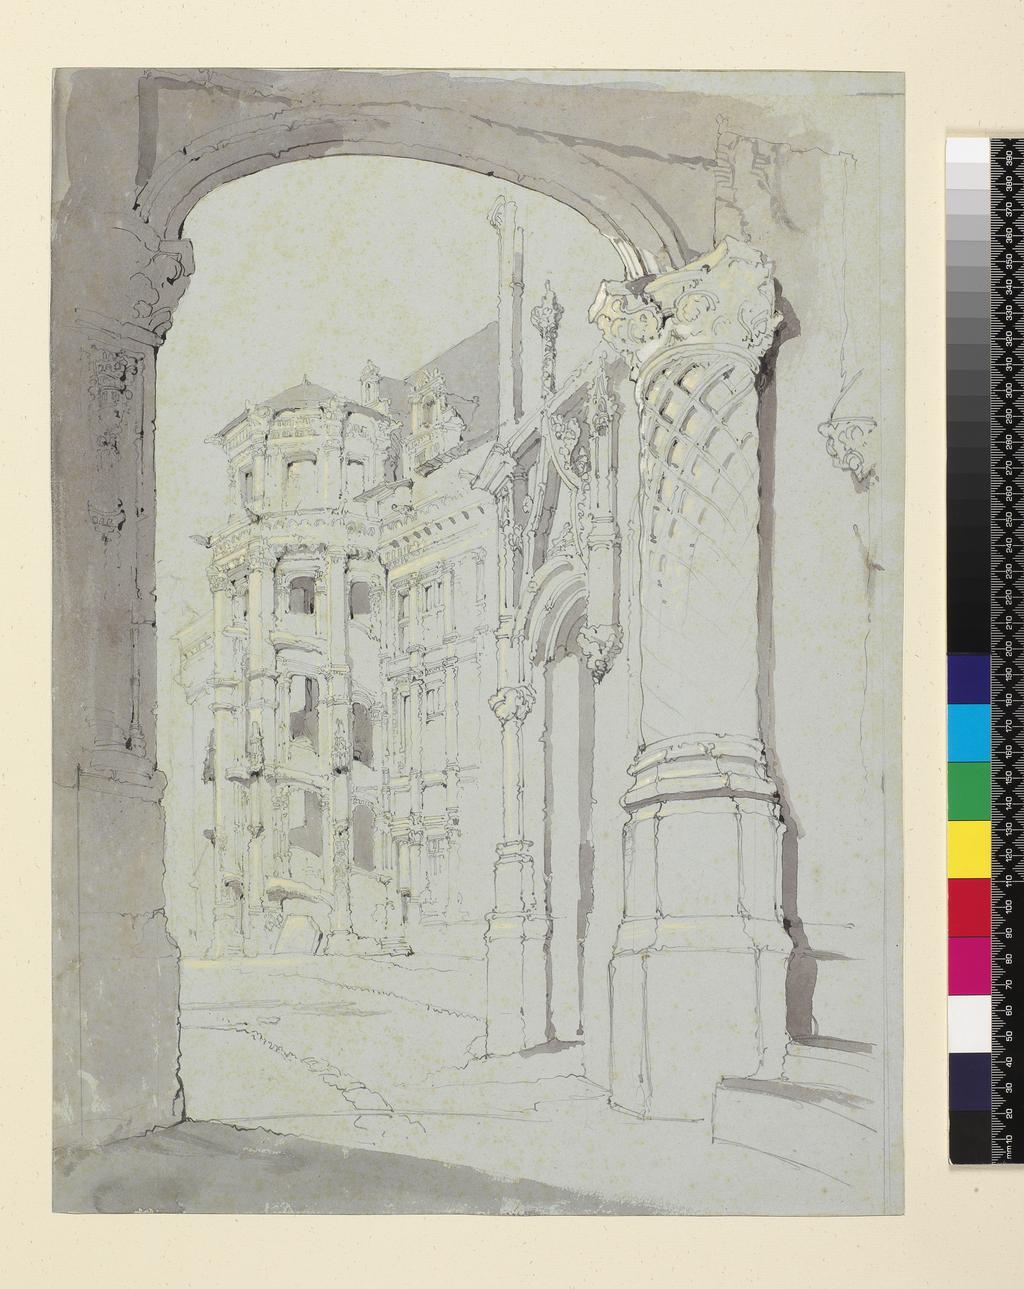 An image of Château de Blois. Spiral staircase. Ruskin, John (British, 1819-1900). Graphite and wash on paper, height 430 mm, width 300 mm.